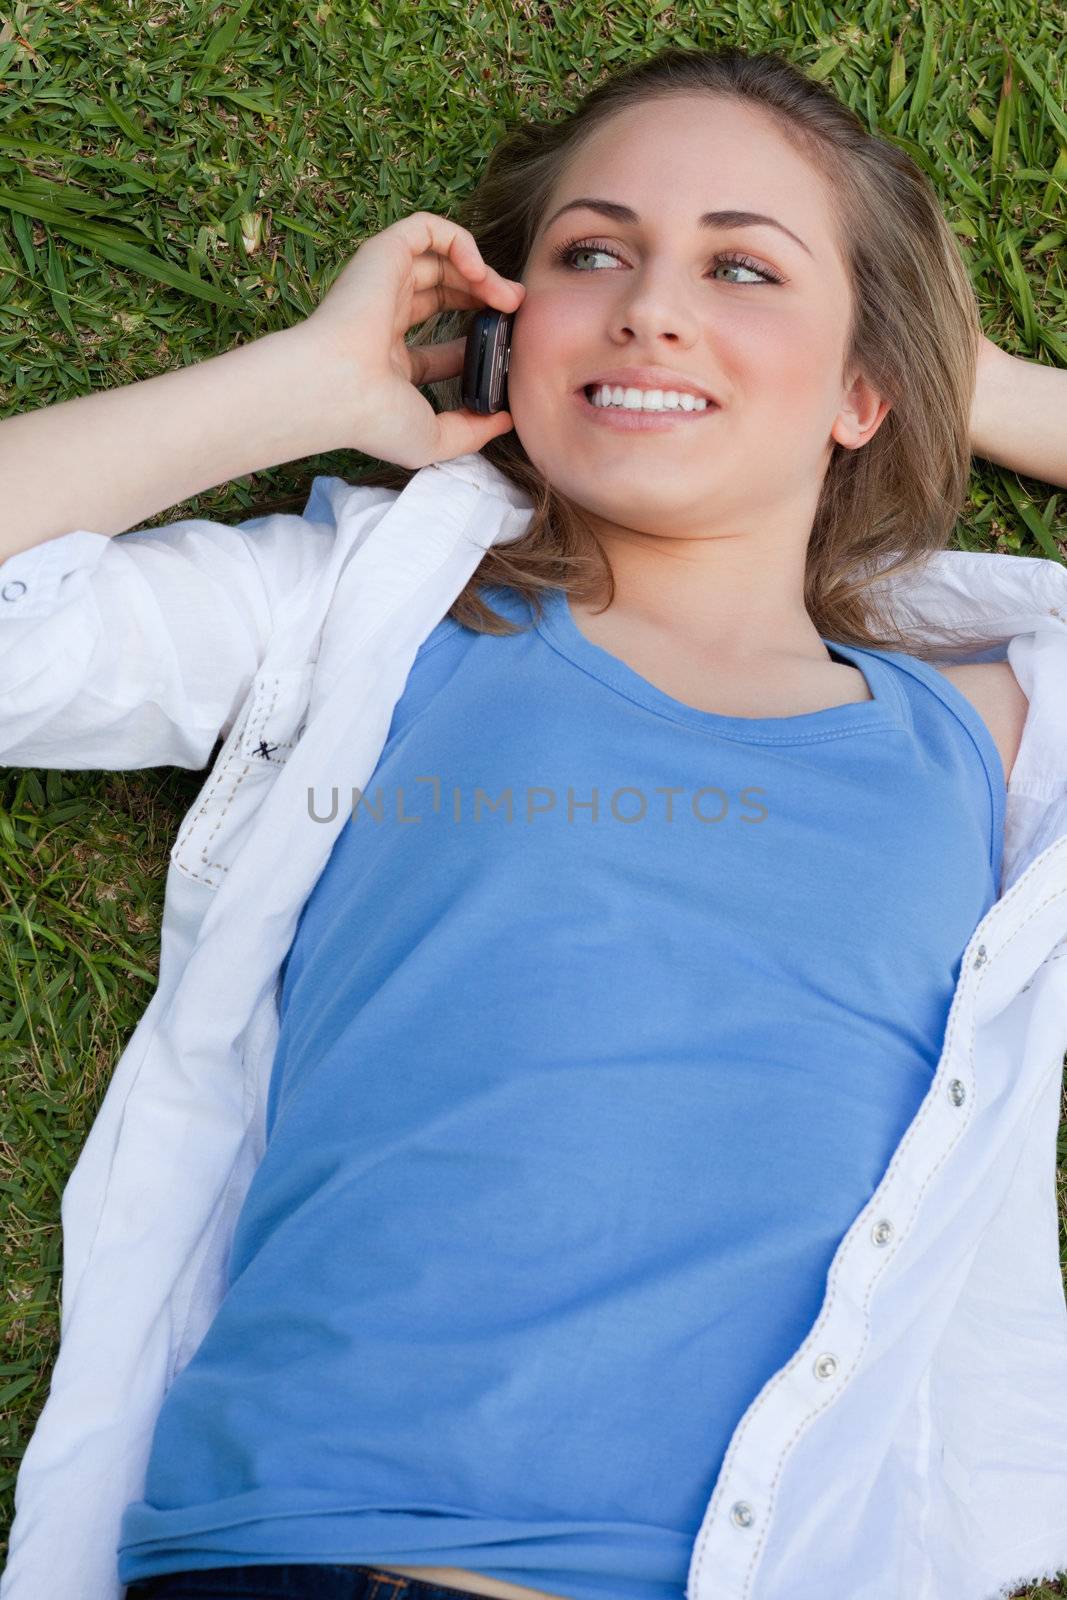 Young smiling girl lying on her back on the grass while using her mobile phone